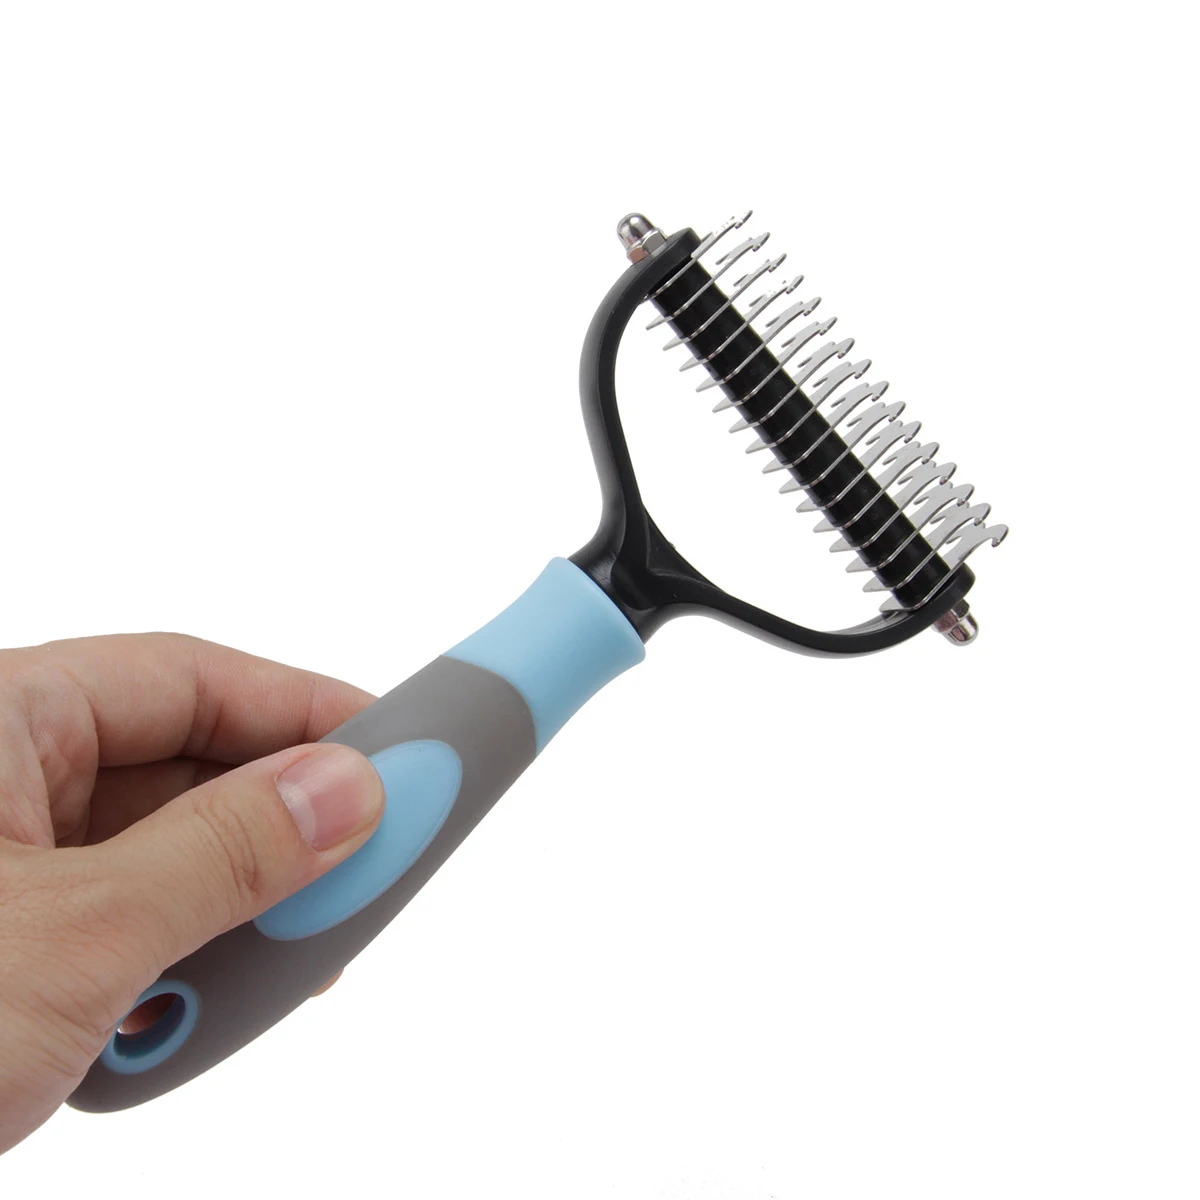 

Stainless Steel Undercoat Rake Dematting Matting Detangle Deshedding Shedding Pet Grooming Hair Remover Comb For Dogs Cats